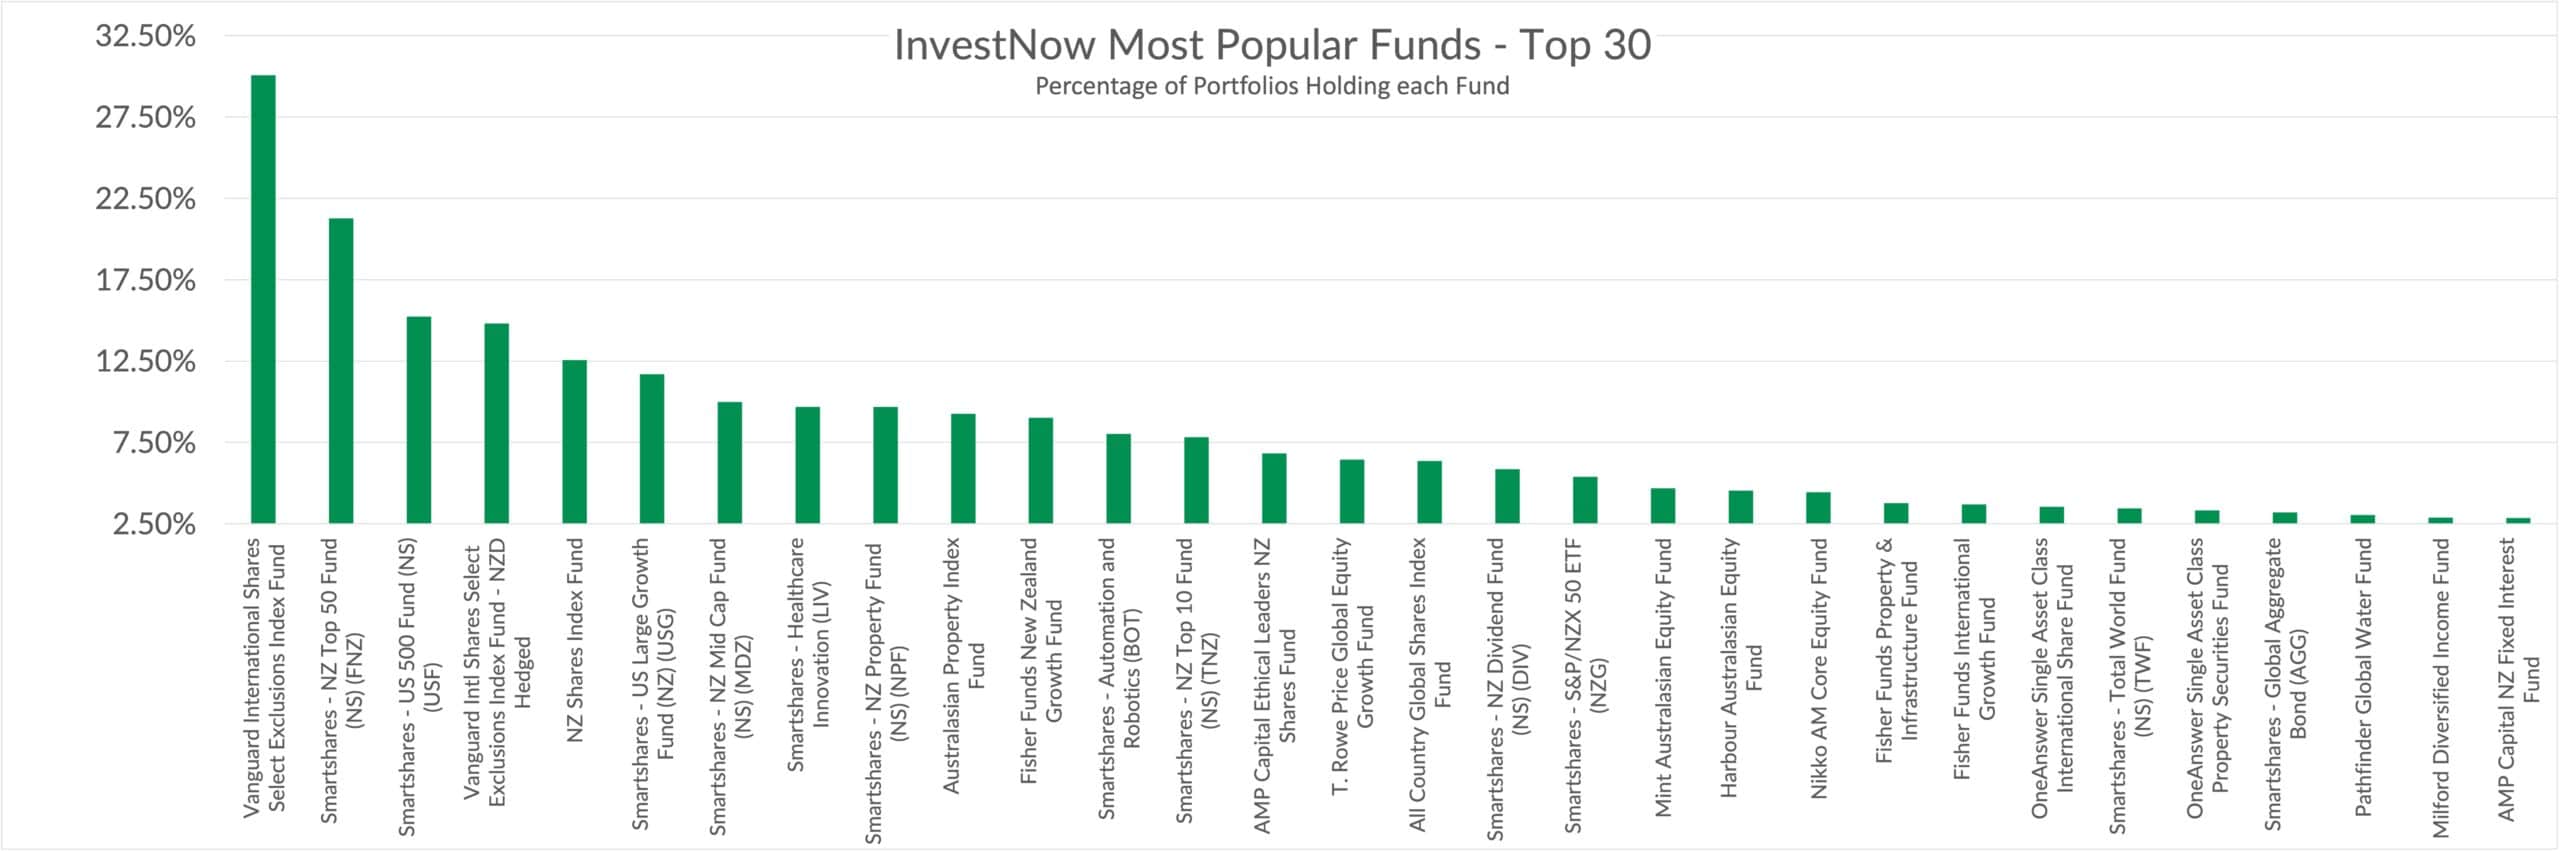 The Most Popular Funds, Our Top 30 January 2021 InvestNow